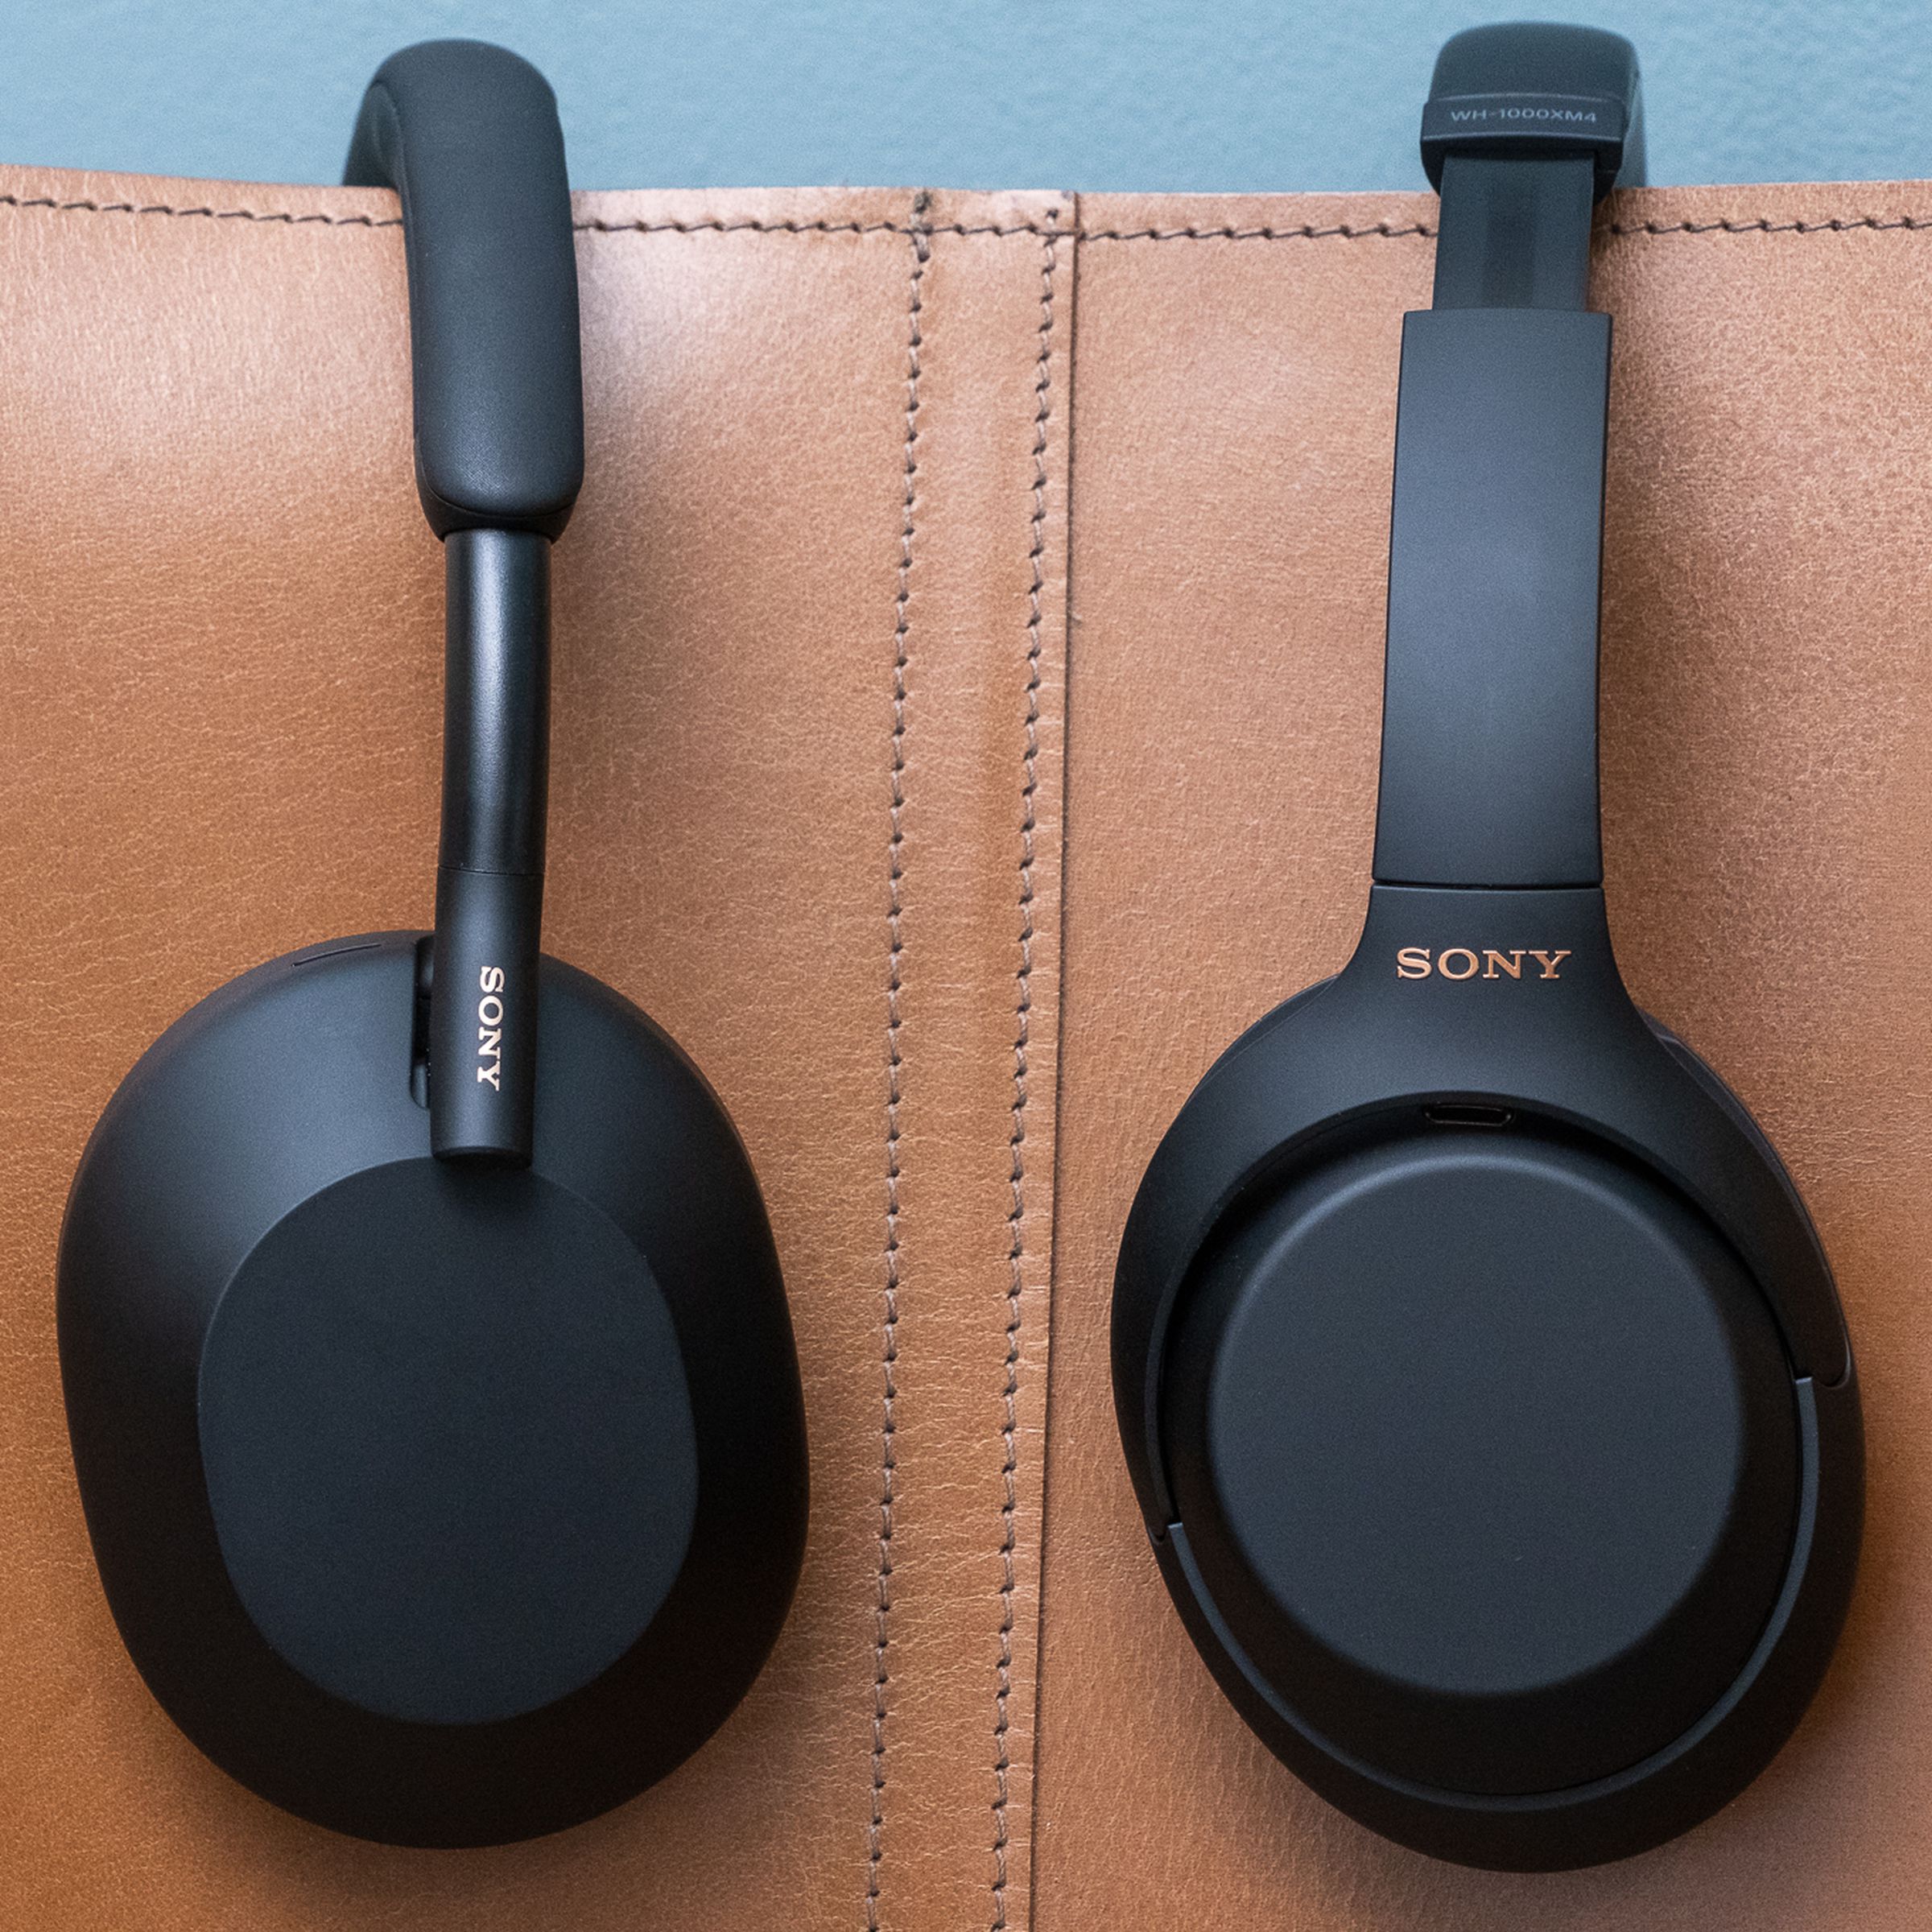 The Sony’s WH-1000XM5 (left) and last-gen WH-1000XM4 (right) hanging on a couch.